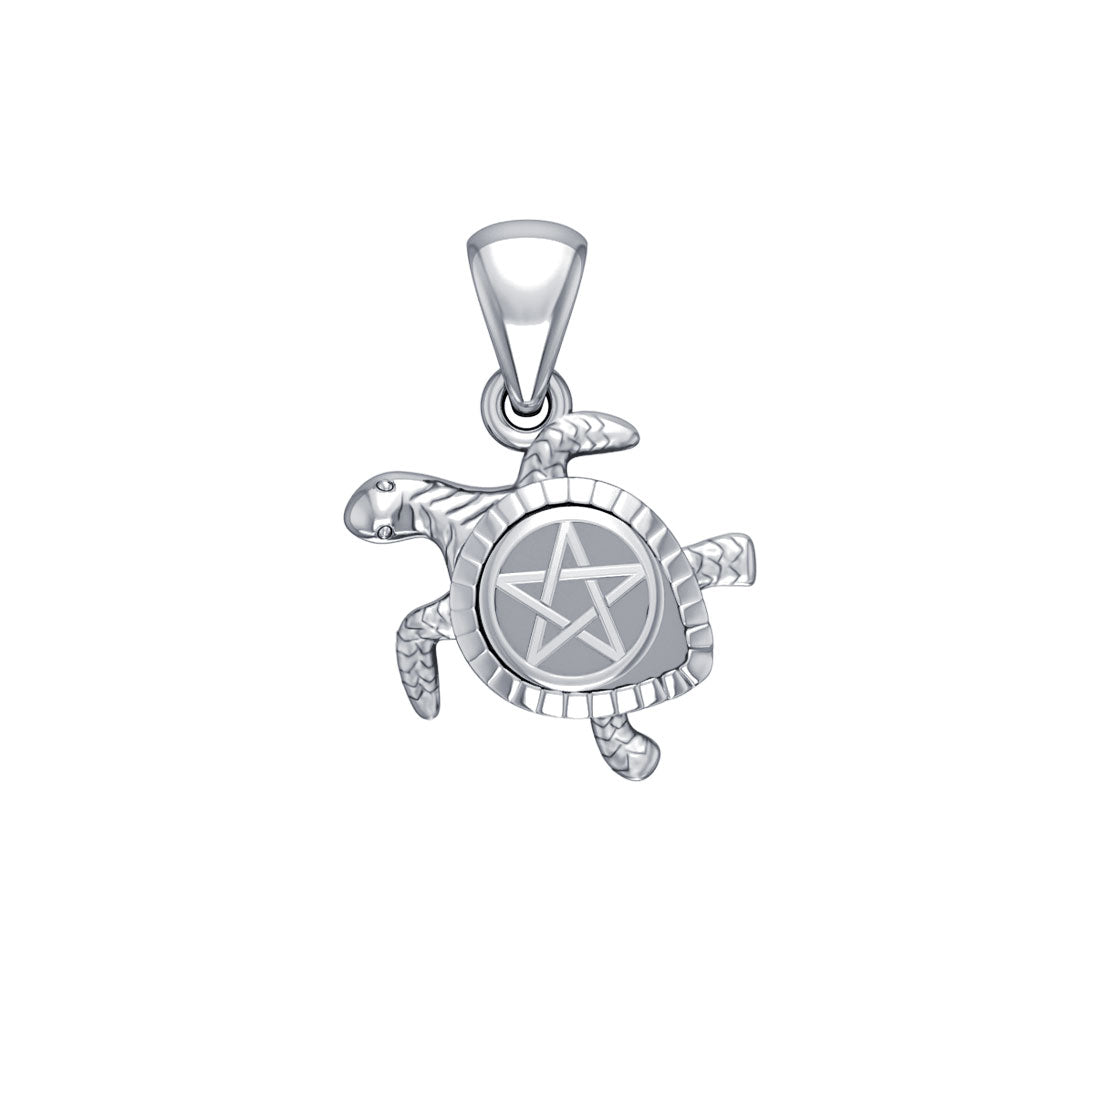 Sea Turtle with Star 14K White Gold Pendant WPD5205